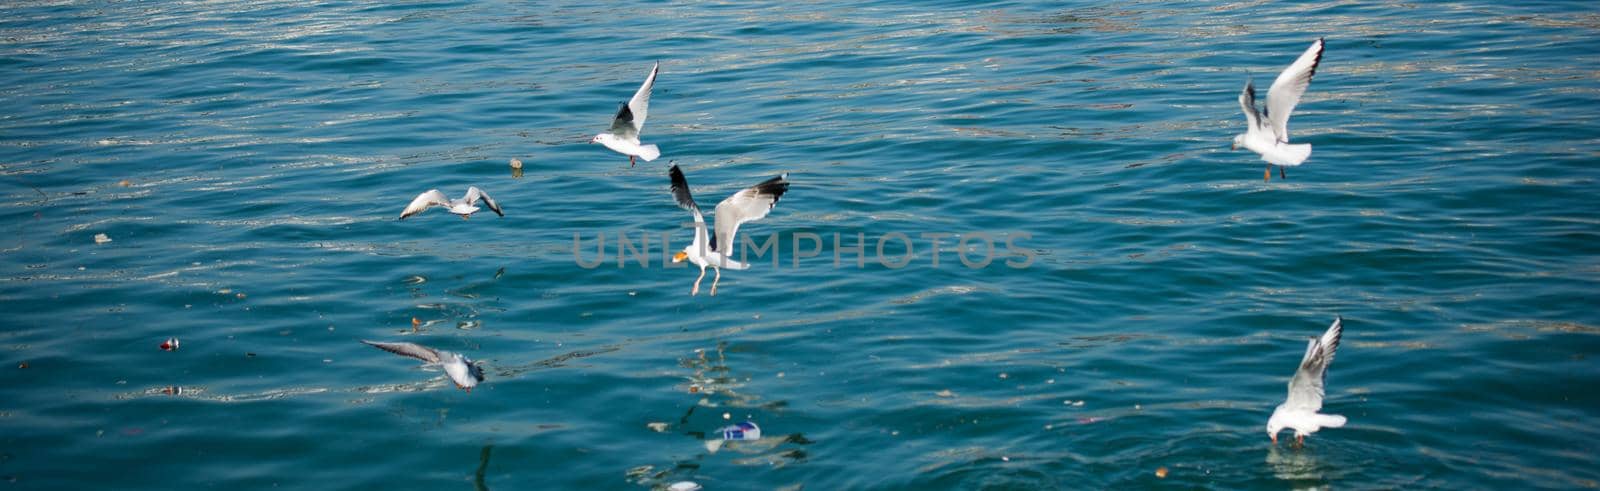 Seagulls flying in sky over the sea waters by berkay